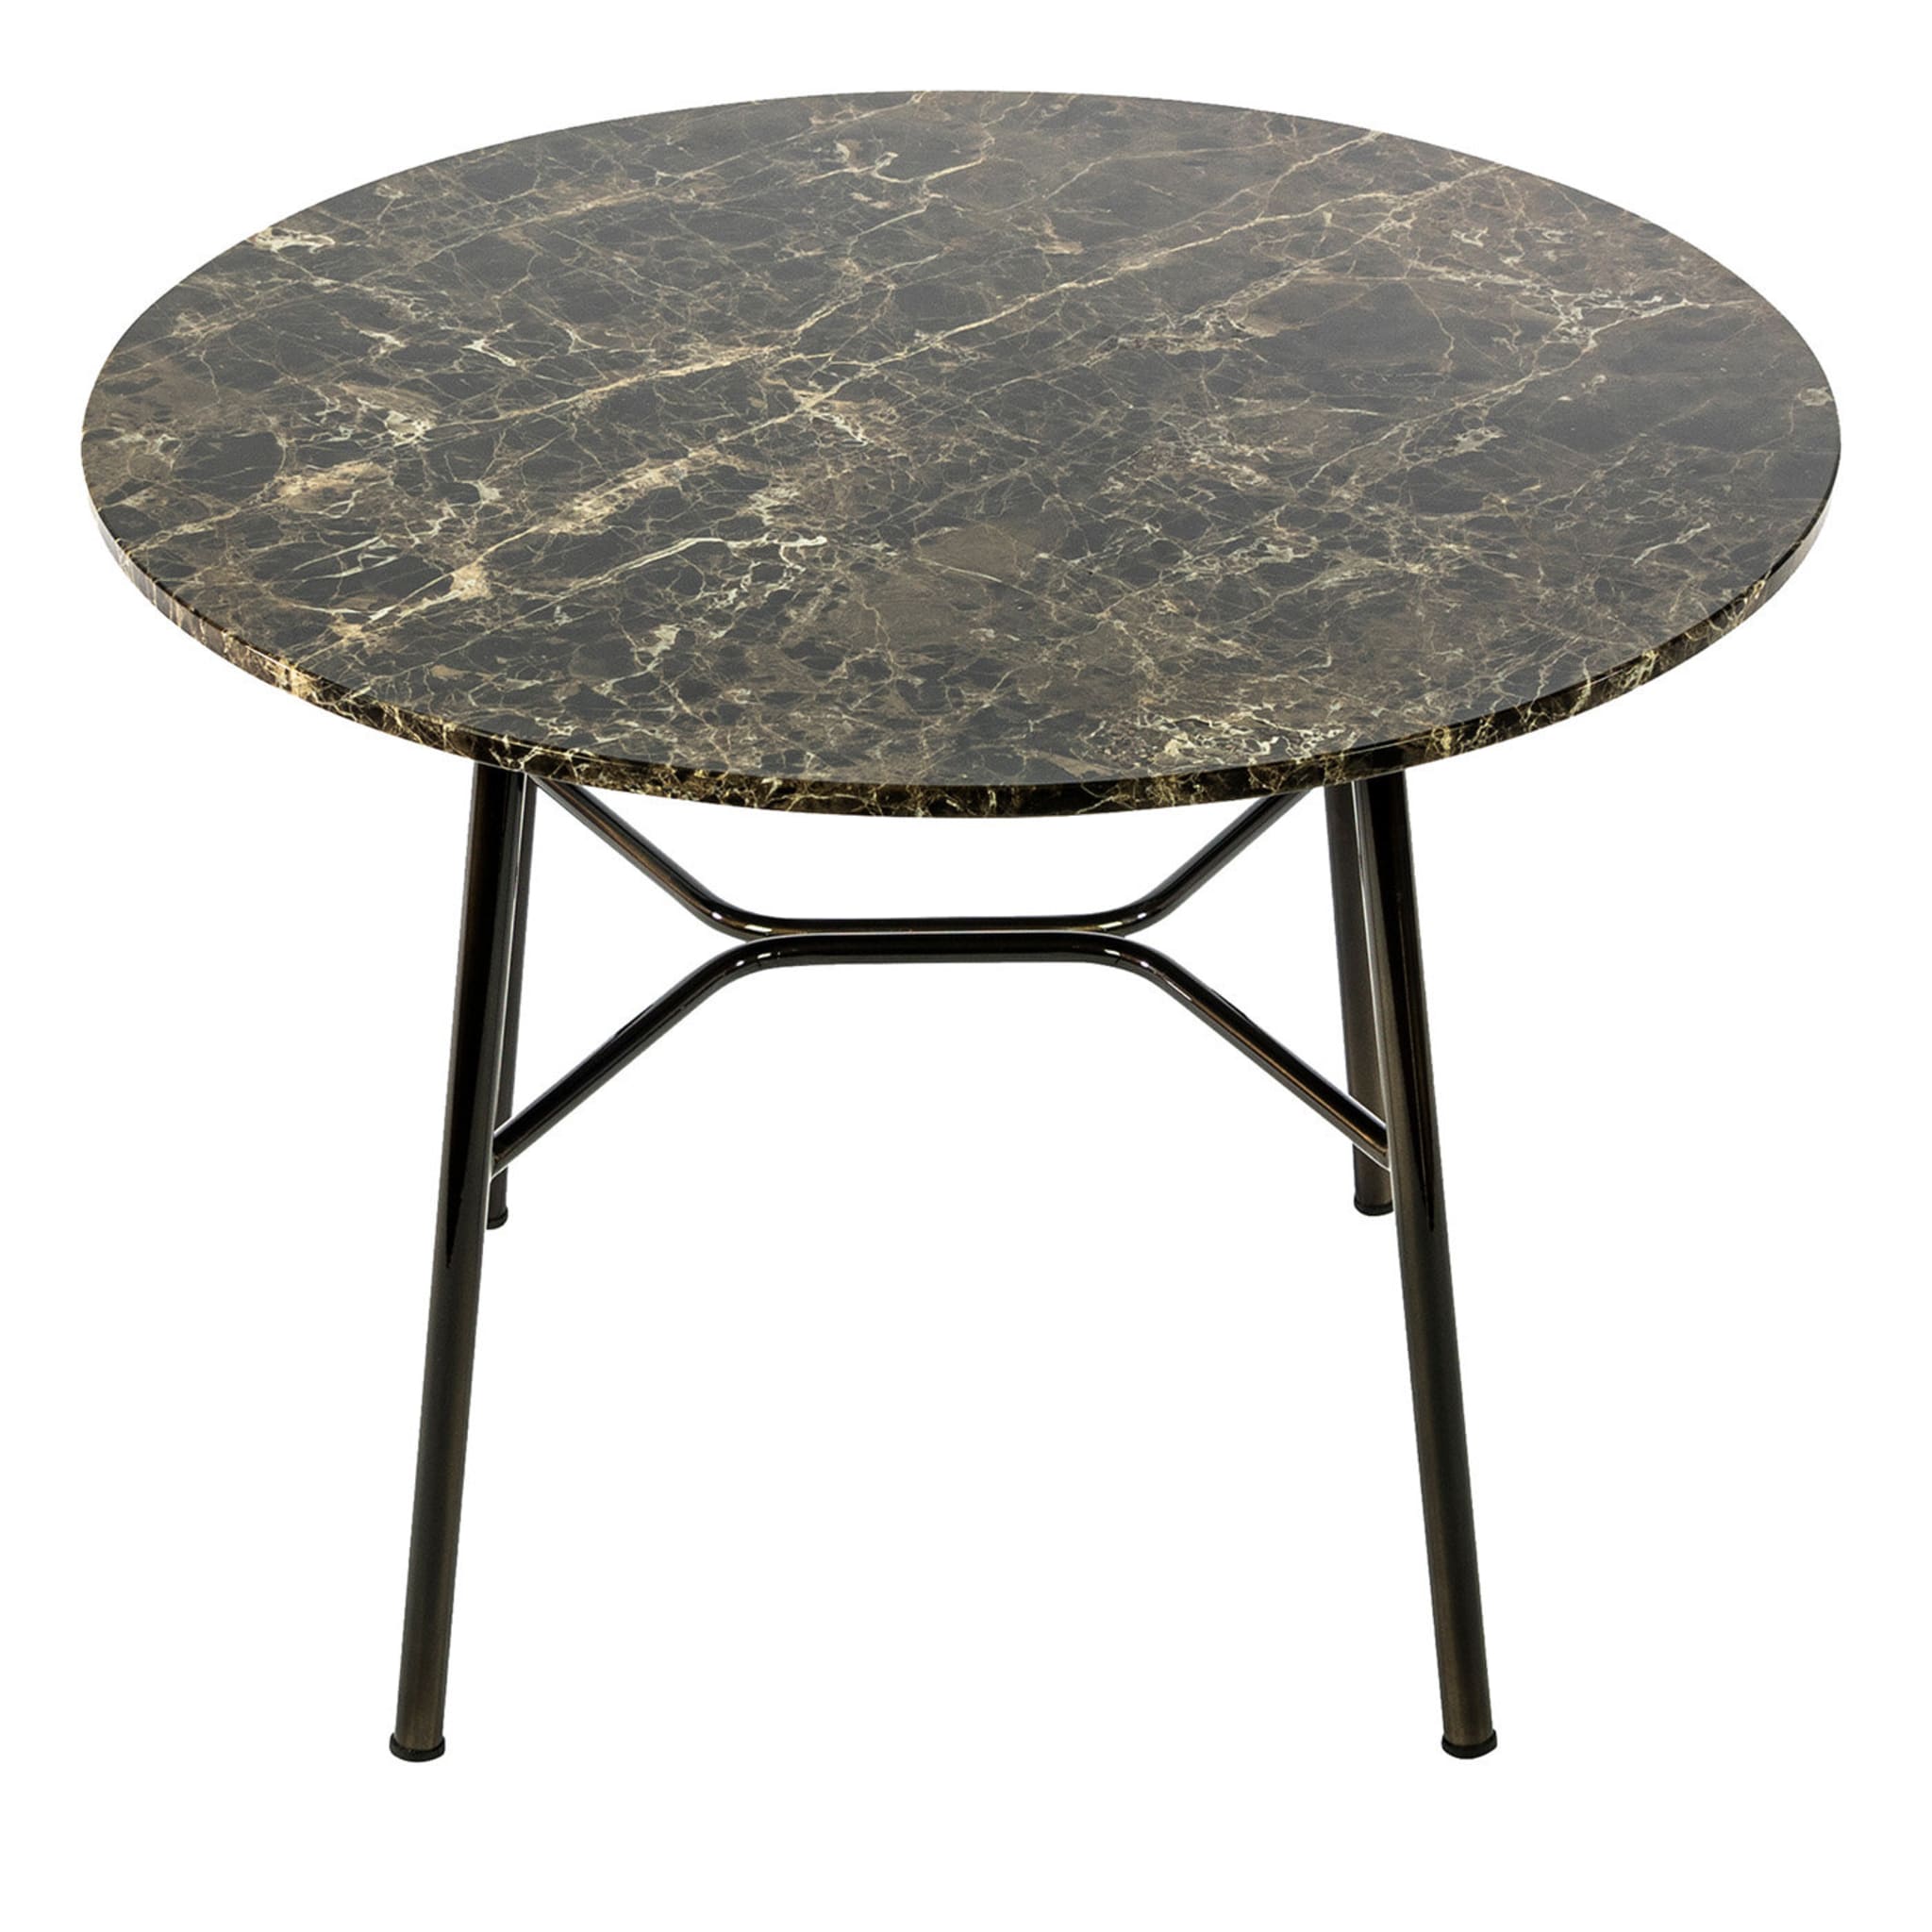 Yuki Round Side Table with Brown Emperador Top # 1 by Ep Studio - Main view